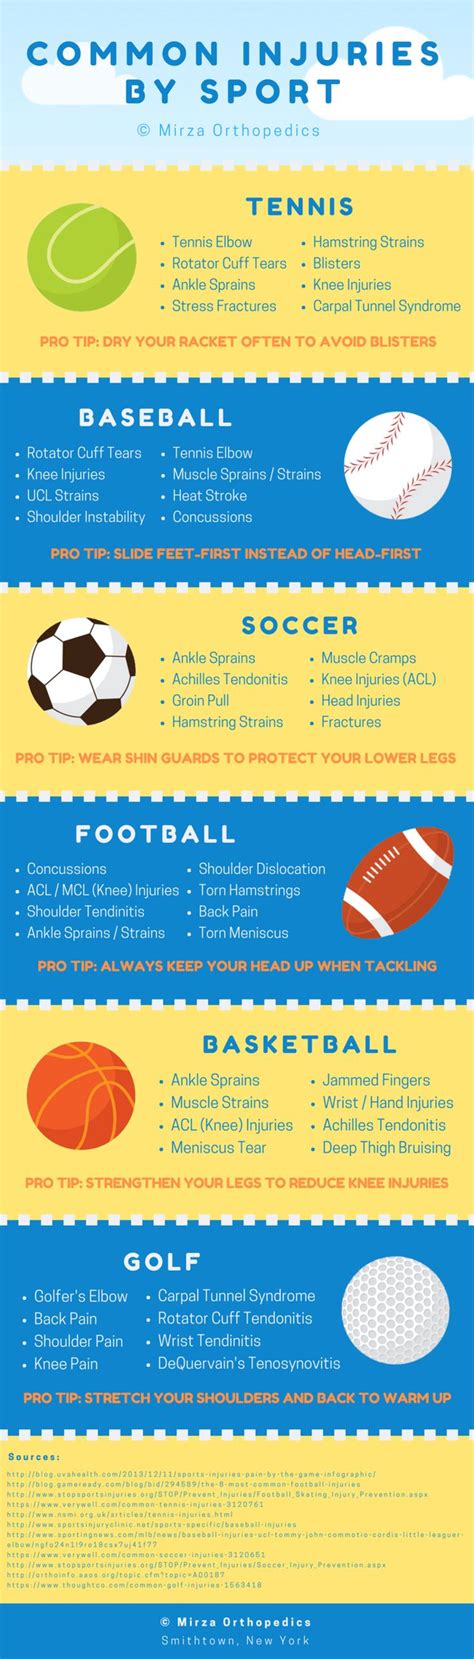 Most Common Sports Injuries Infographic Portal Sports Injury